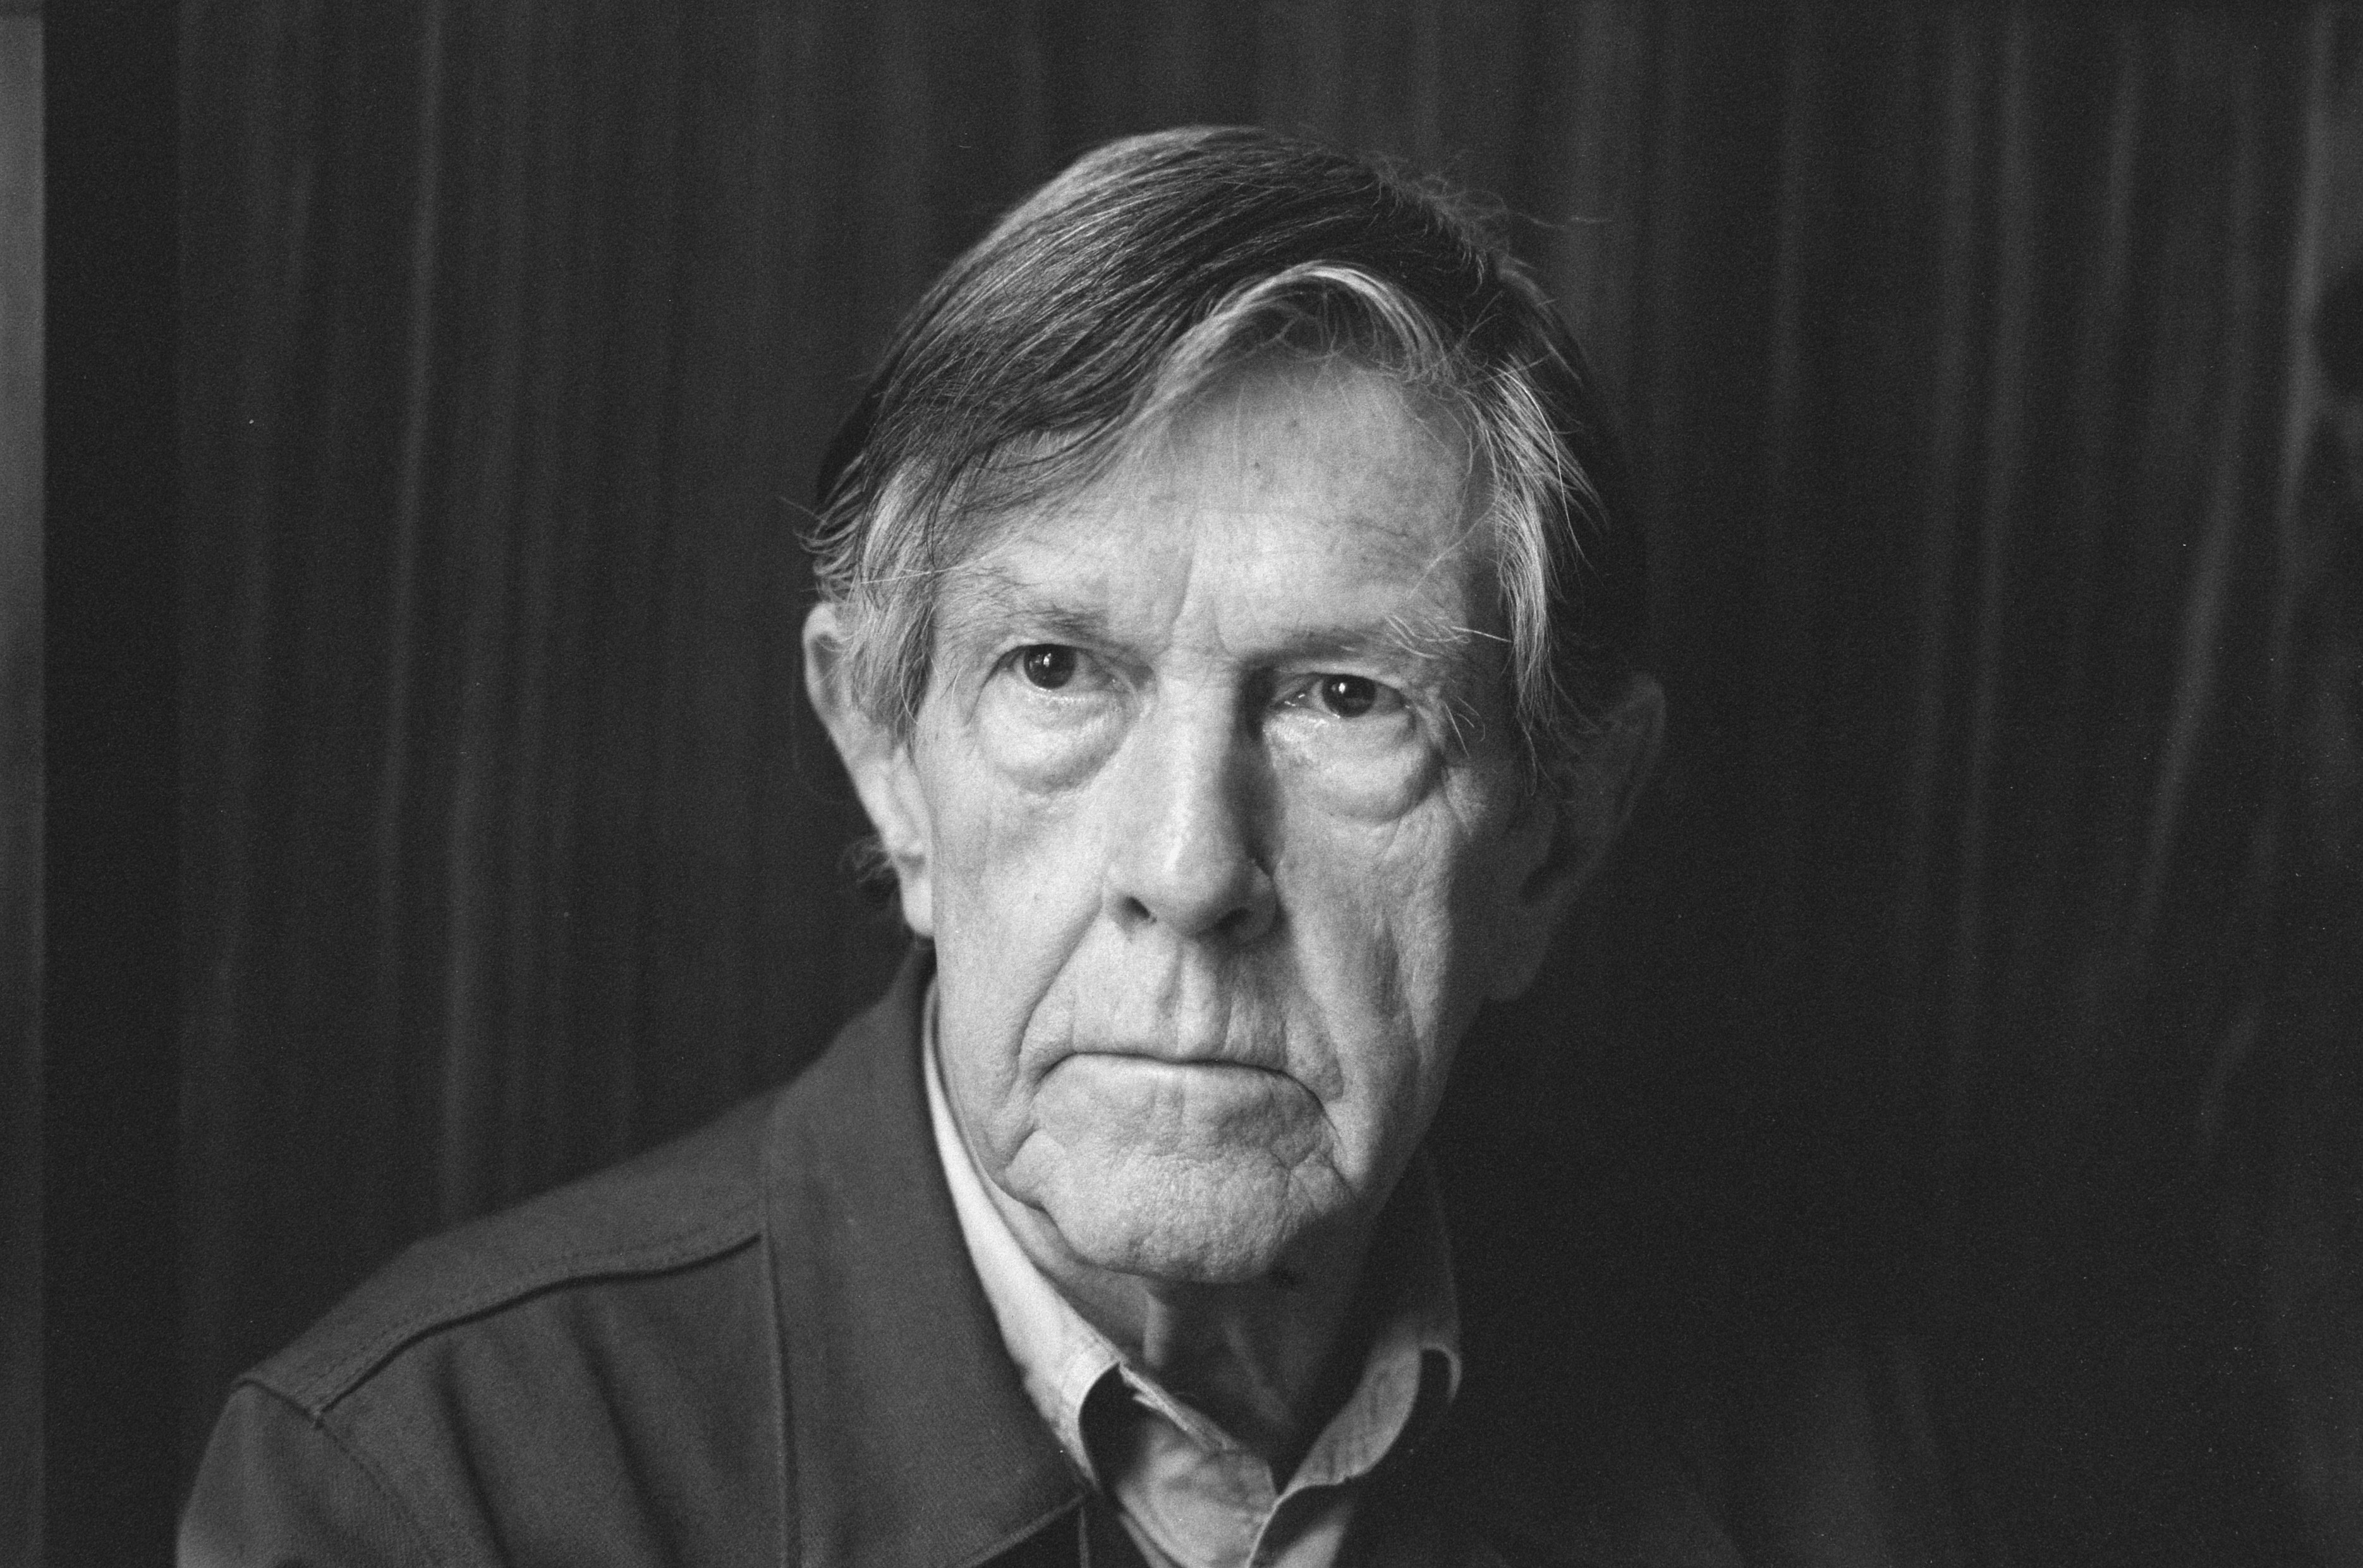 Image of John Cage from Wikidata